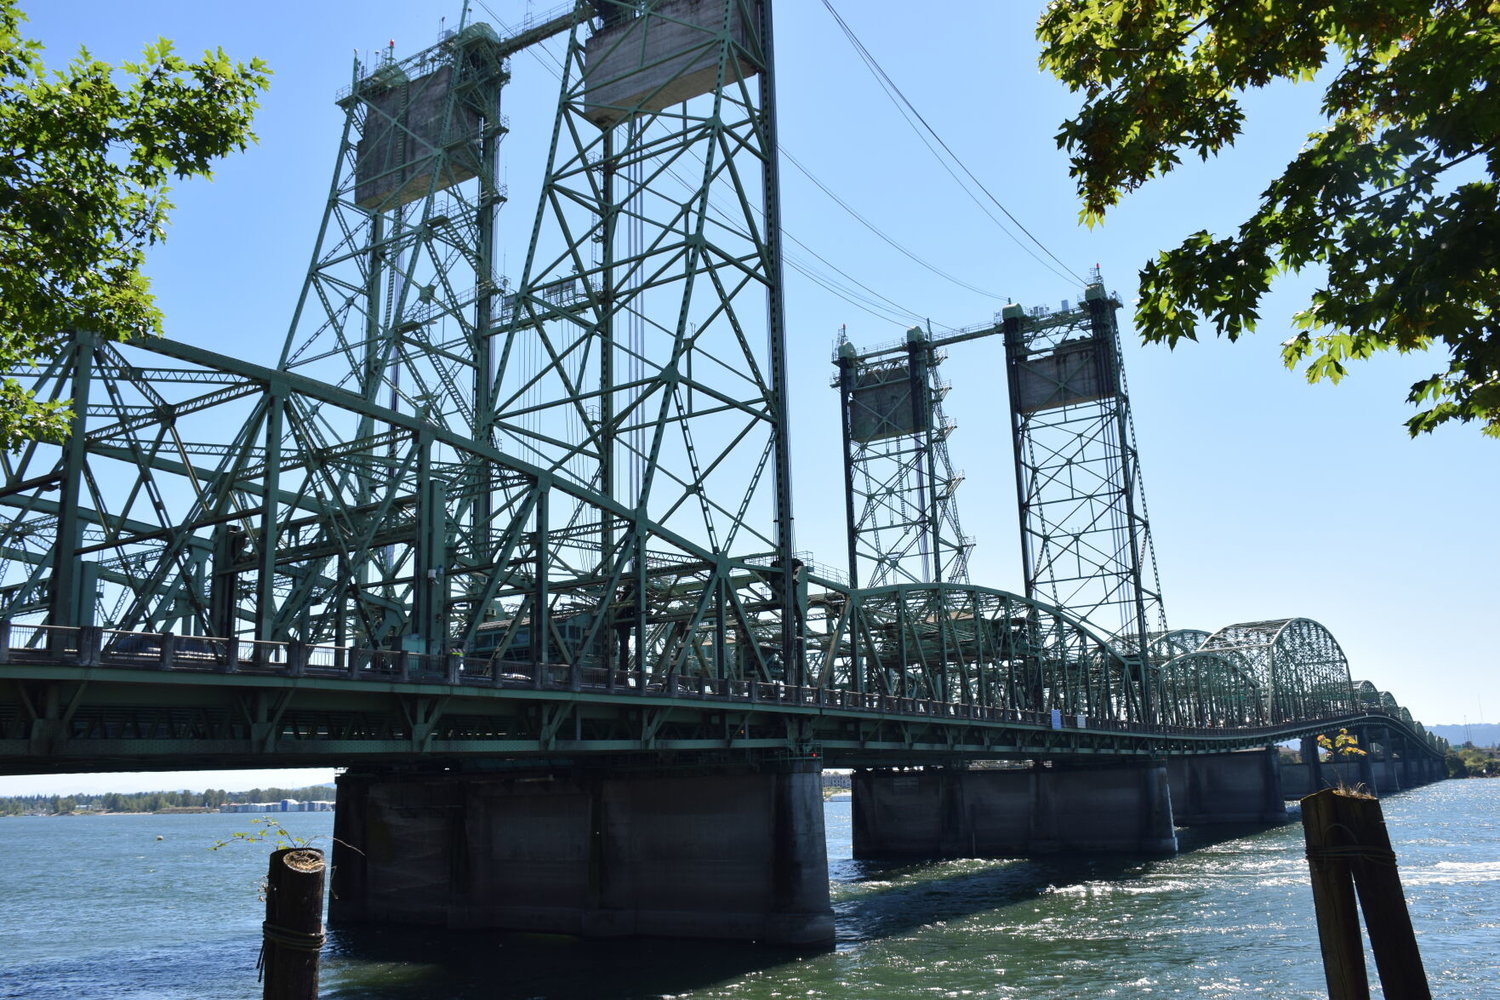 The Interstate 5 bridge is pictured.